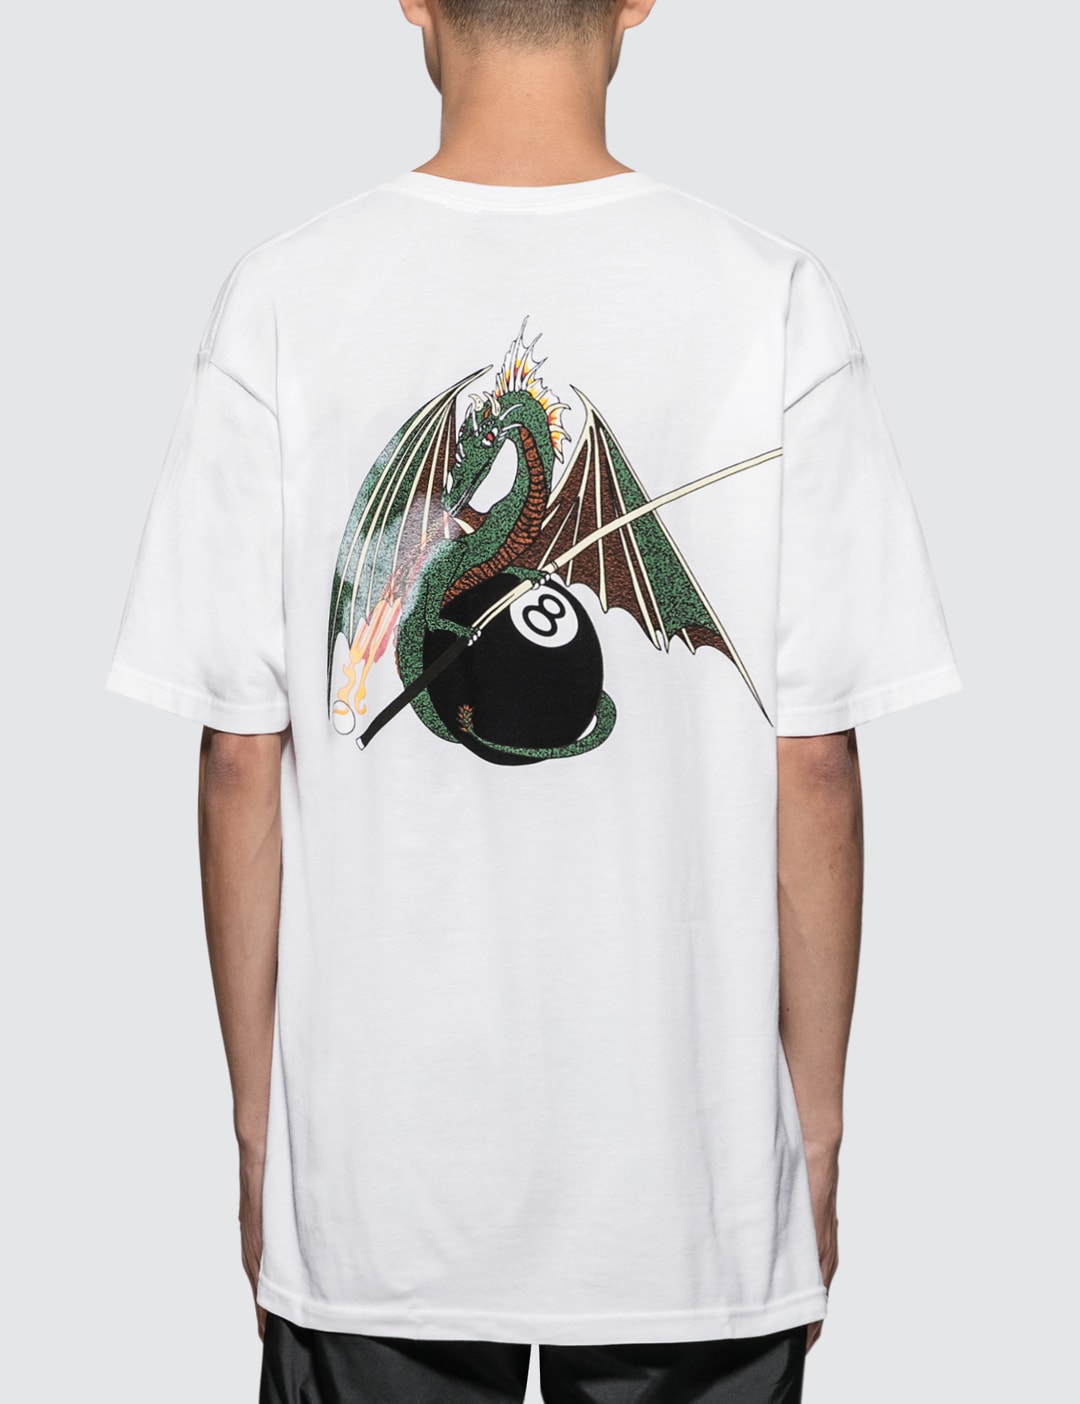 Stüssy - Pool Dragon T-Shirt | HBX - Globally Curated Fashion and ...